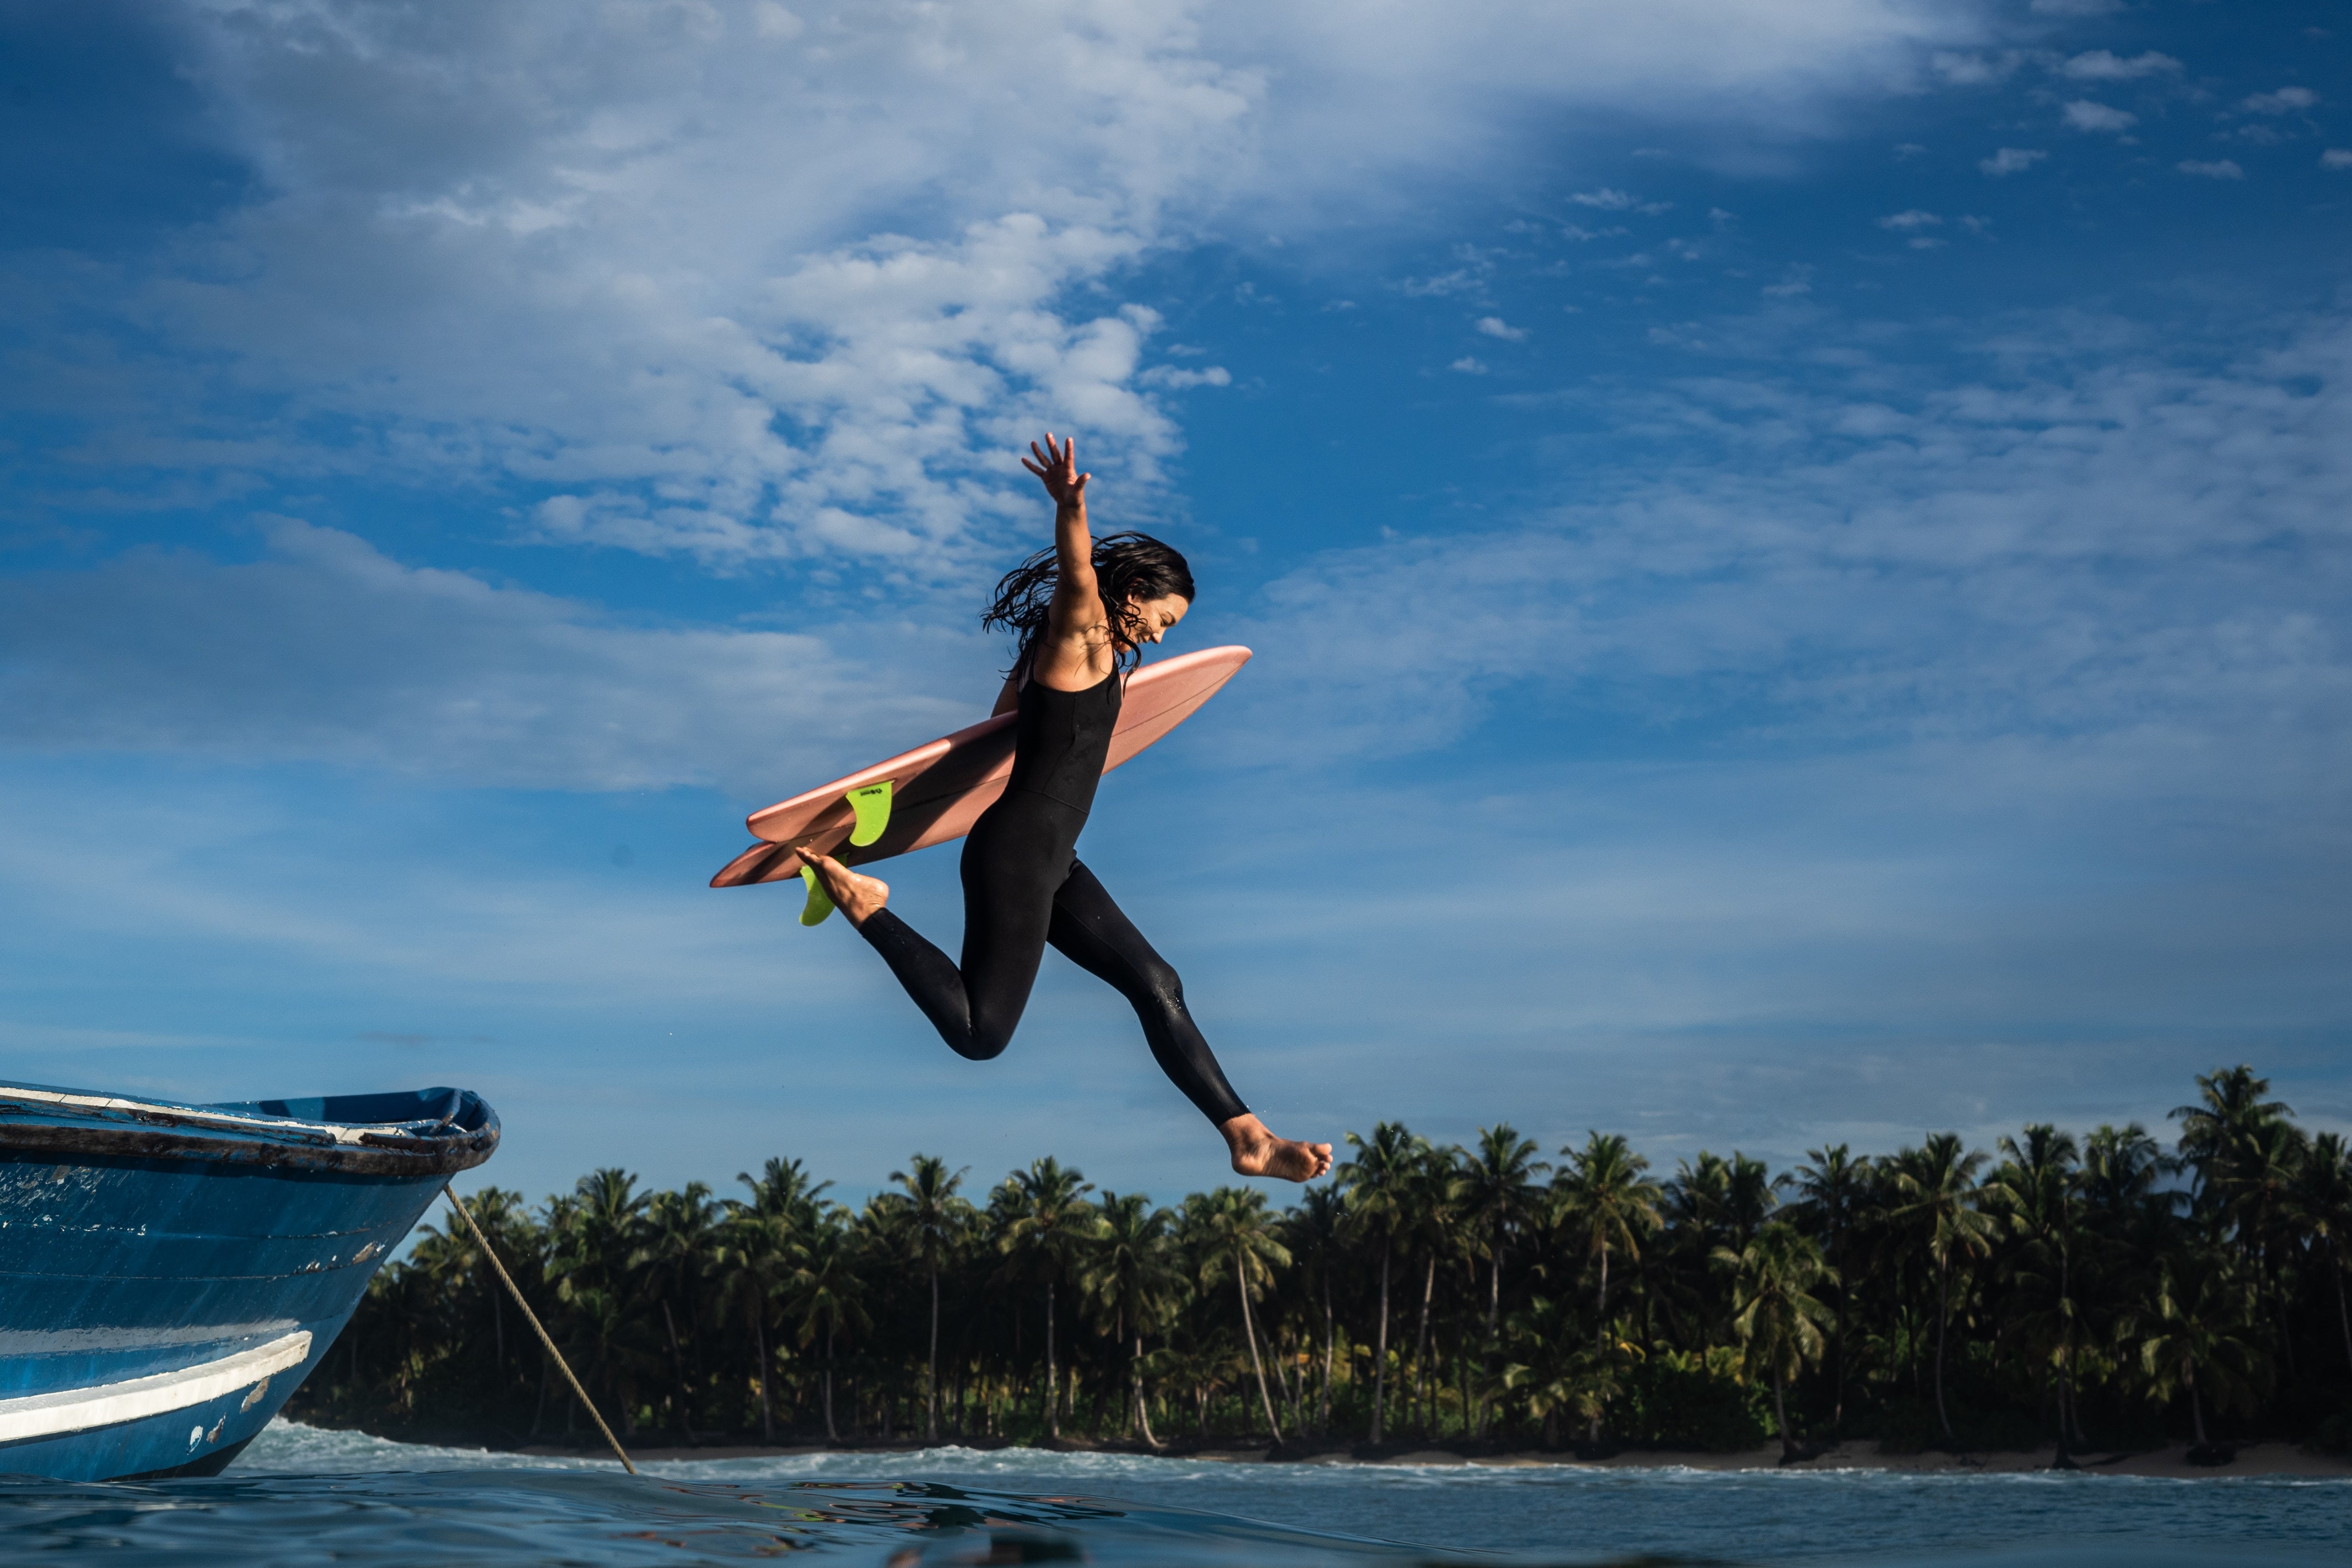 Seea surfer Rosie Jaffurs jumps off the boat into the ocean for a surf in the Mentawai Islands